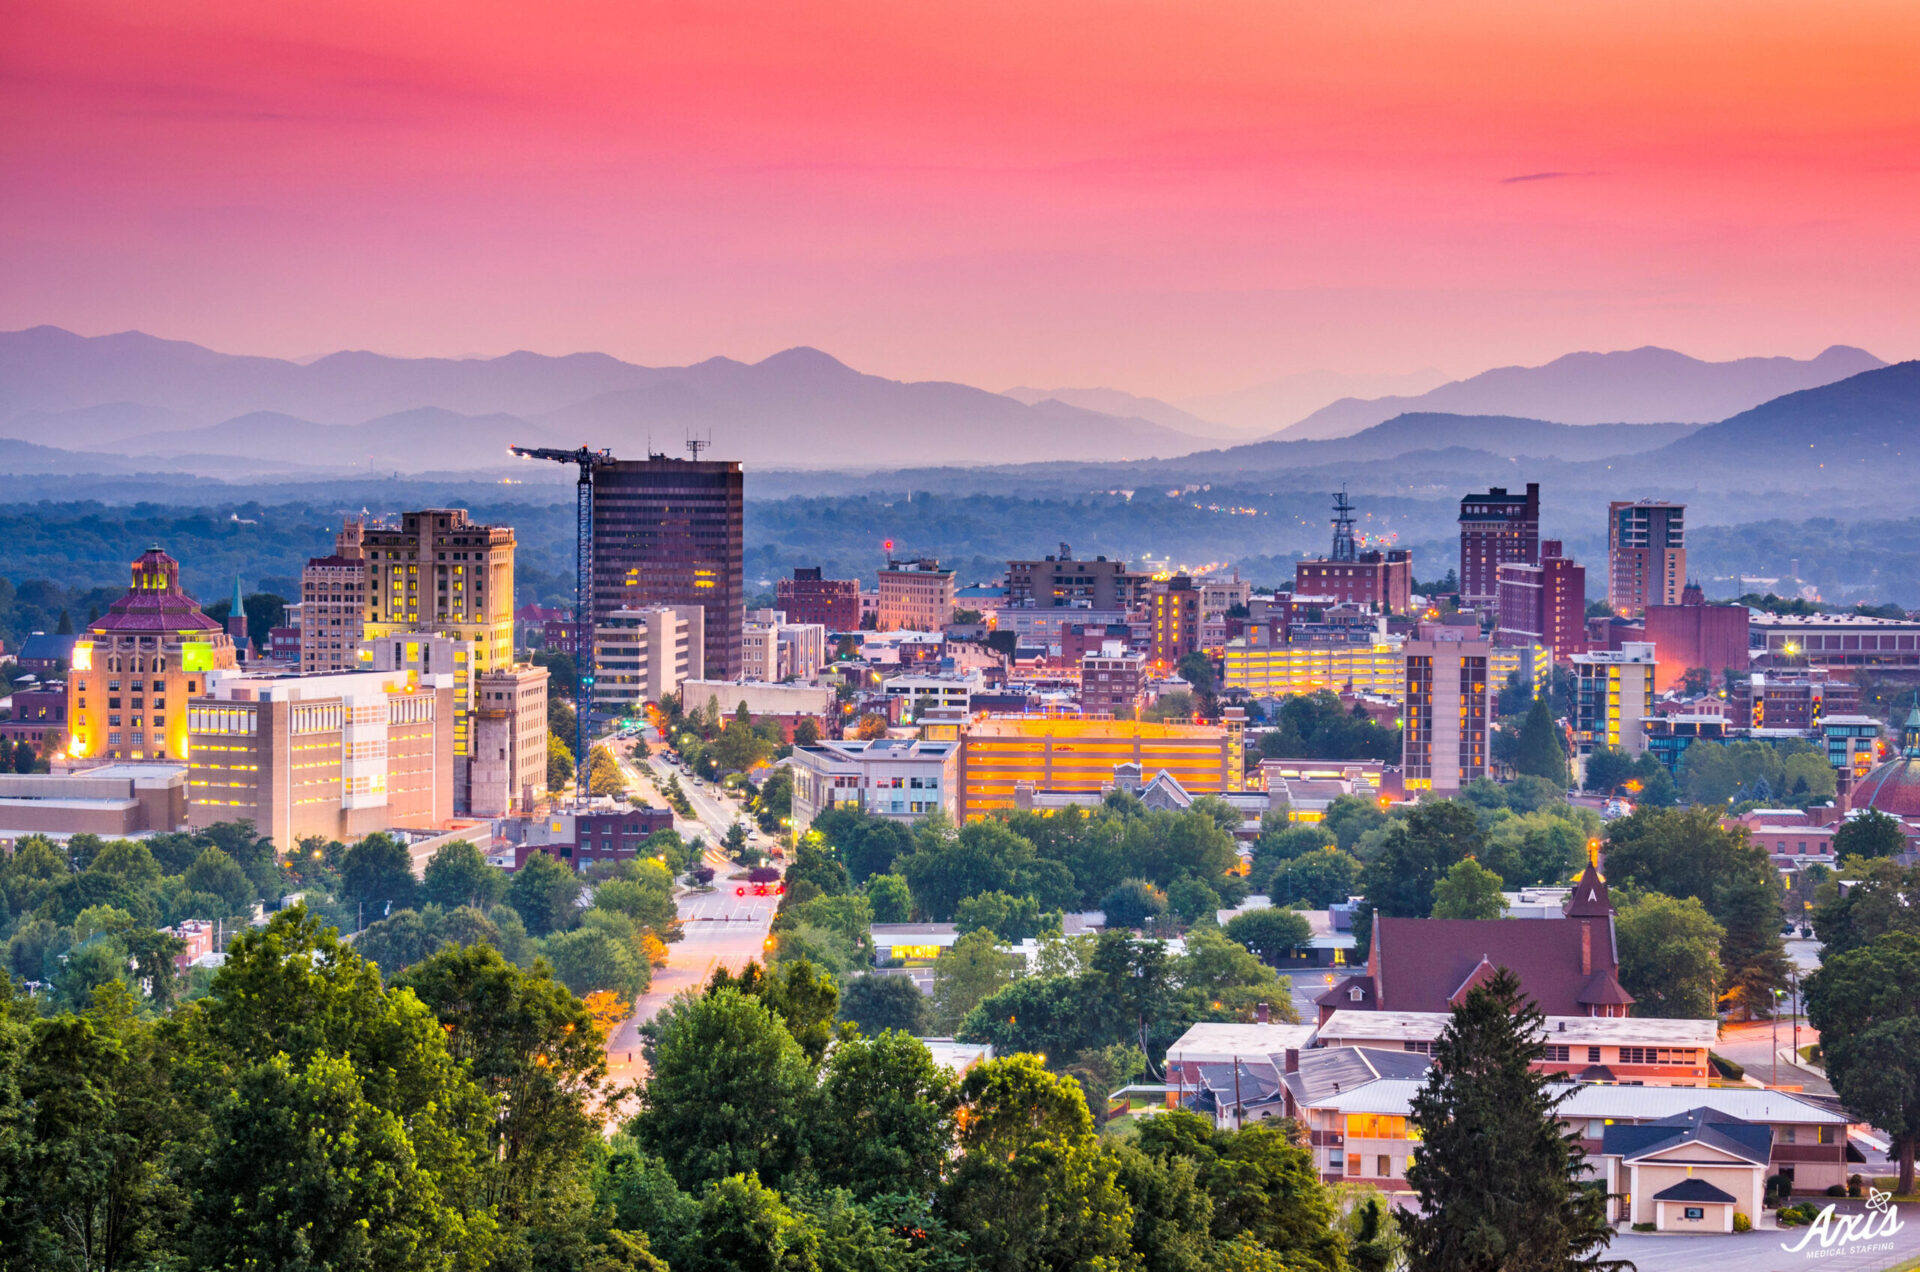 Travel Nurse Assignments: Live Like a Local – Asheville, NC!